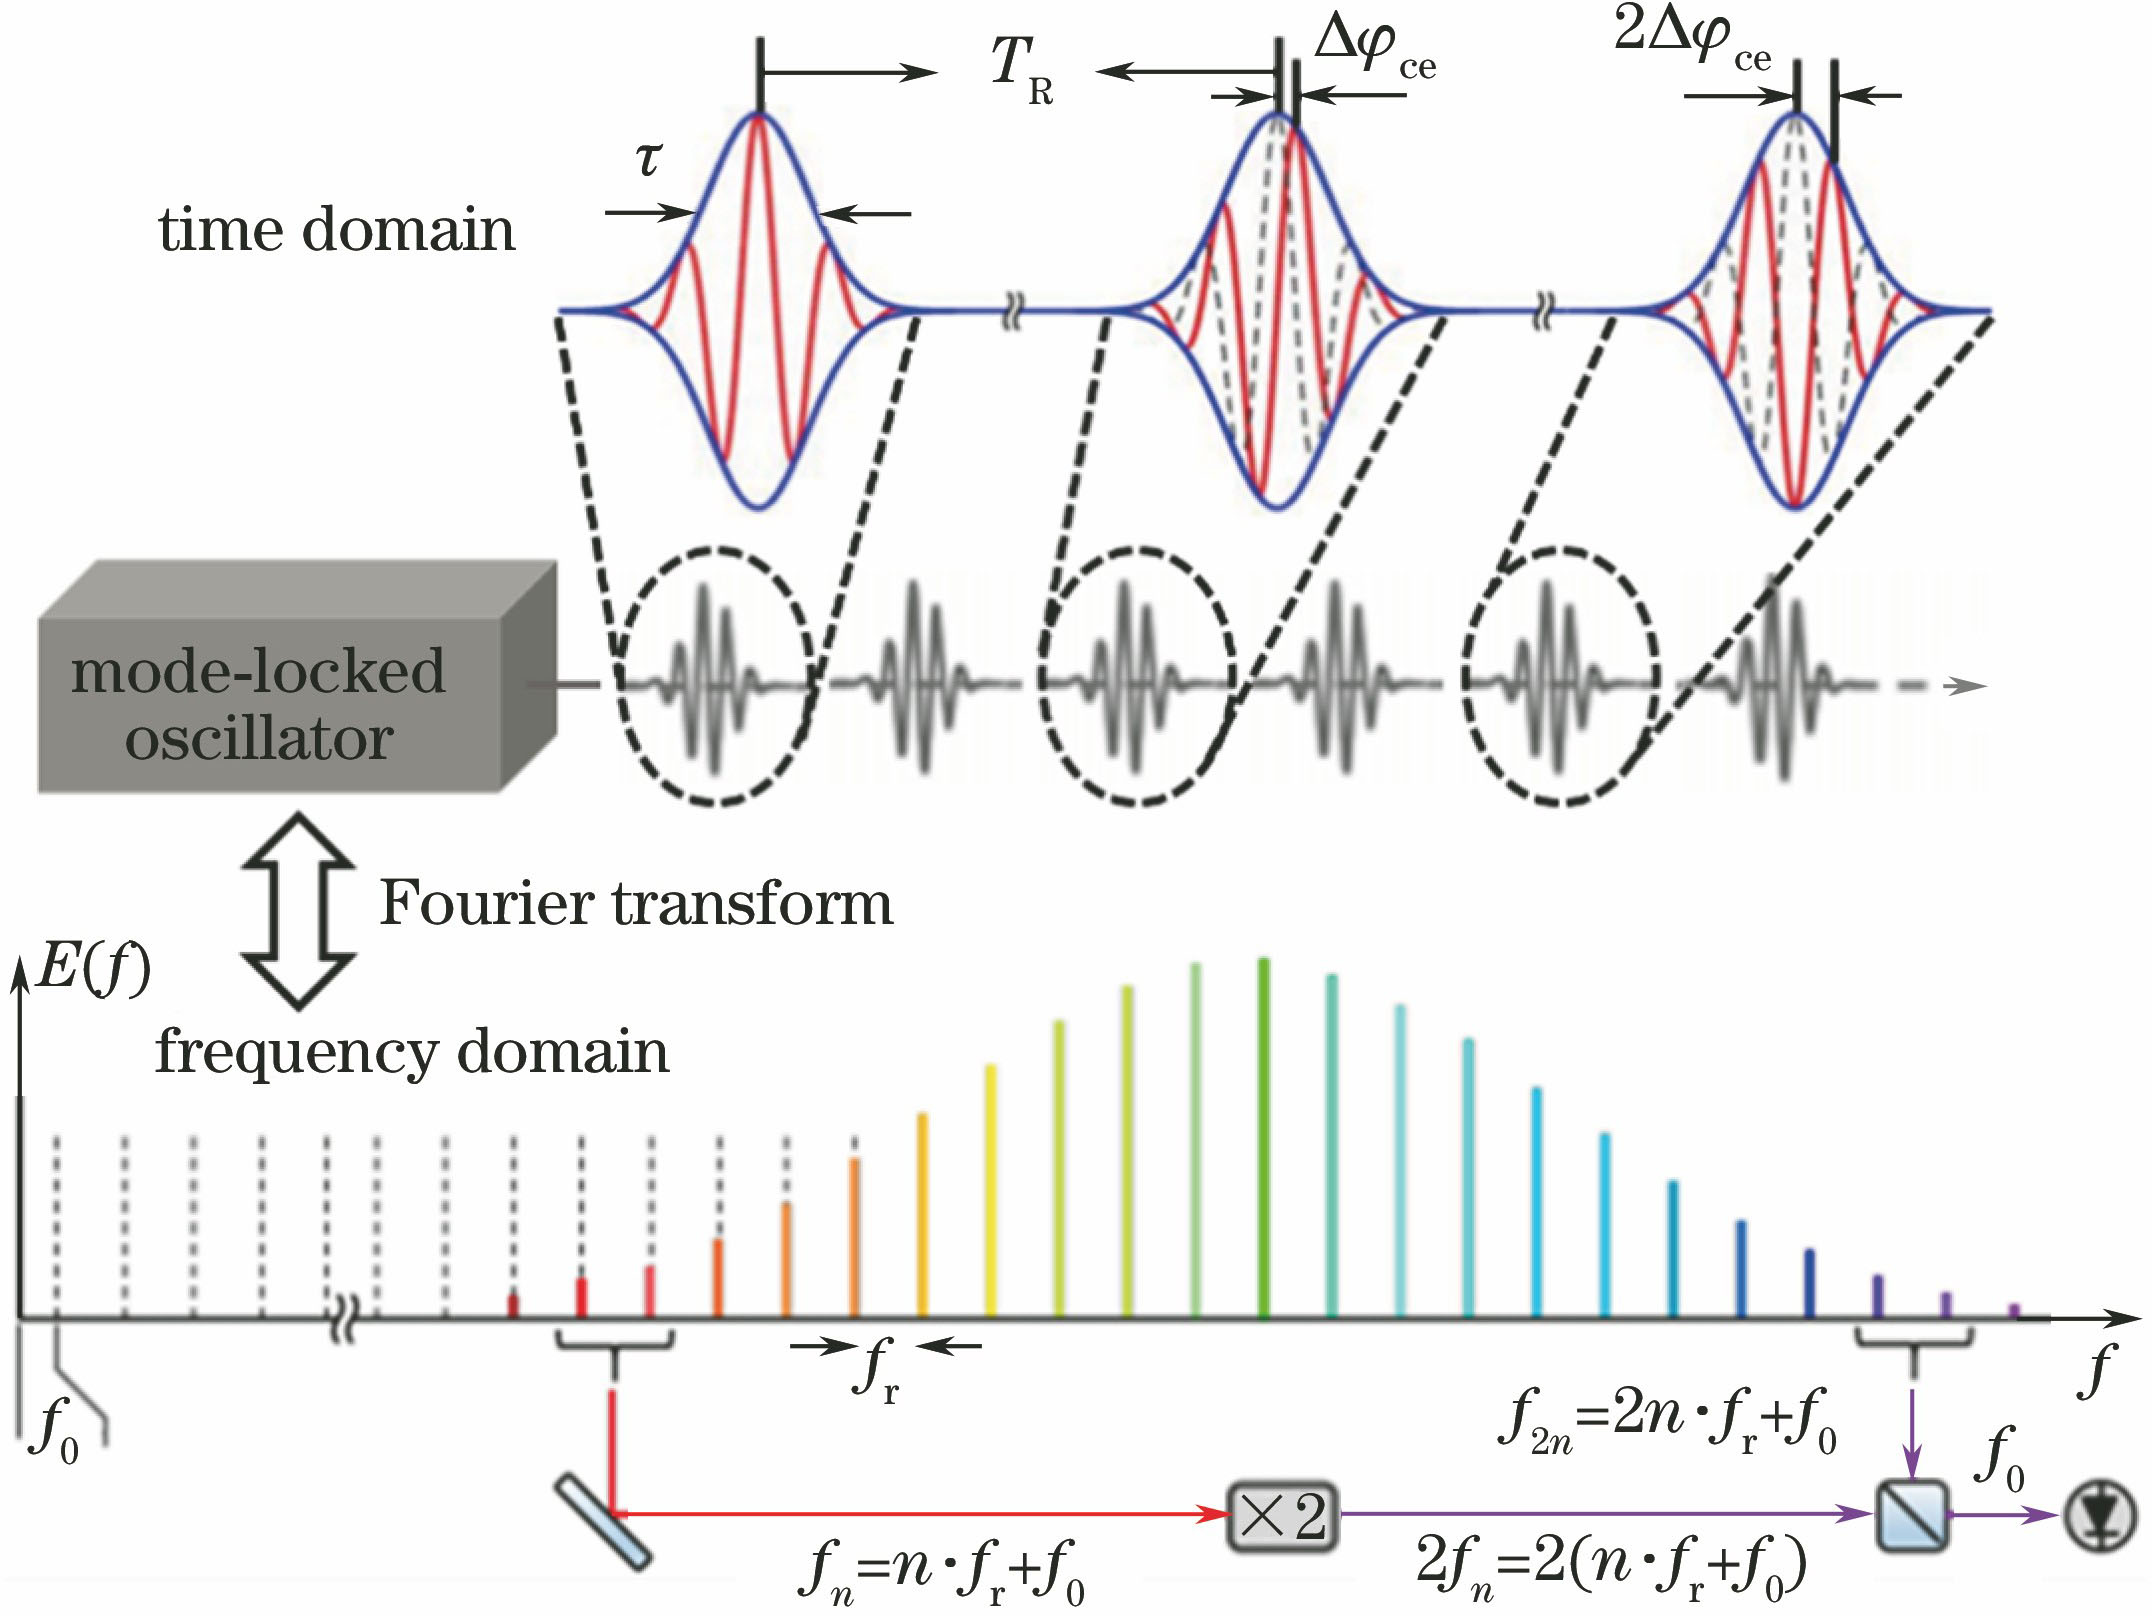 Fourier transform of the mode-locked laser in time and frequency domains